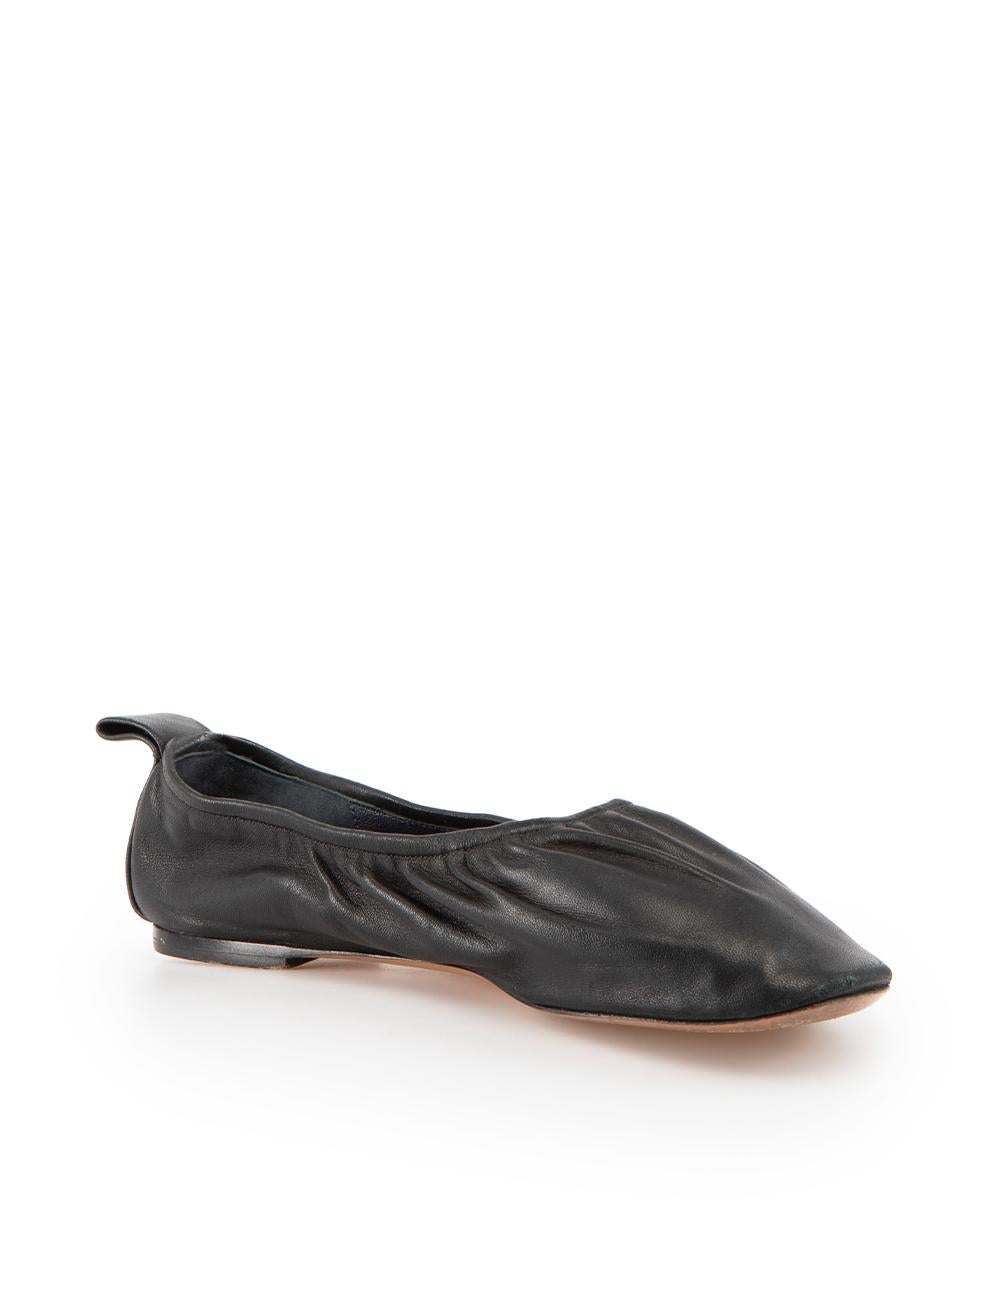 CONDITION is Good. General wear to flats is evident. Moderate signs of wear where abrasions and pilling to leather is evident to on tip and back of heel on both shoes on this used Celine designer resale item.
 
Details
Black
Leather
Ballet